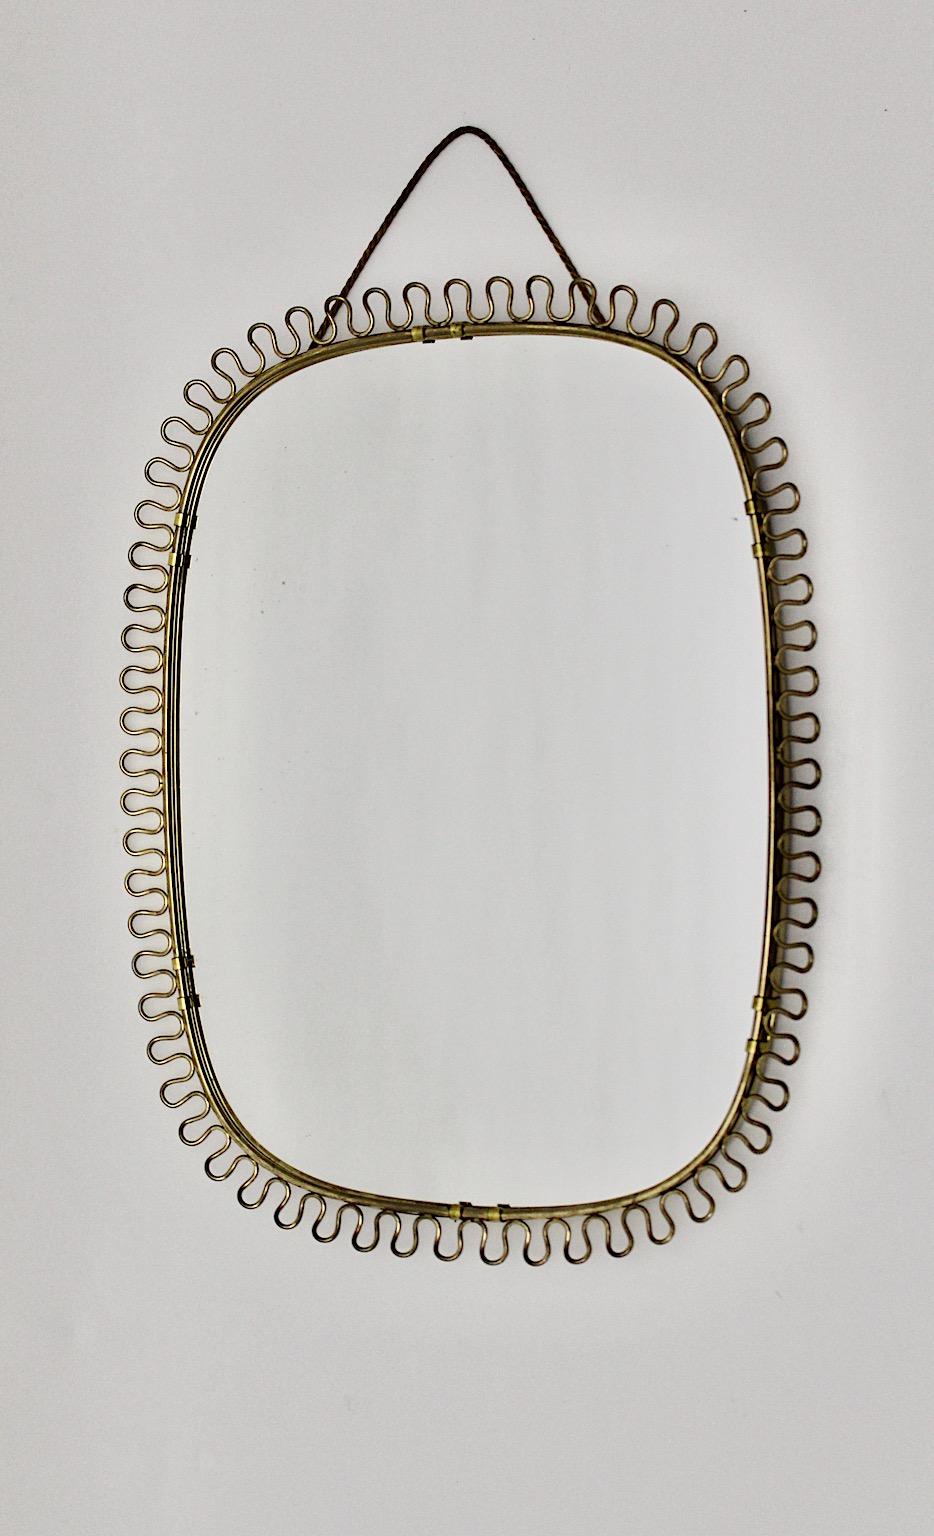 Mid-Century Modern vintage wall sunburst mirror oval like by Josef Frank
for Svenskt Tenn 1950s Sweden.
A stunning wall mirror with curved nice loops frame worked in brass in rare oval shape.
This sunburst mirror features elegant texture of